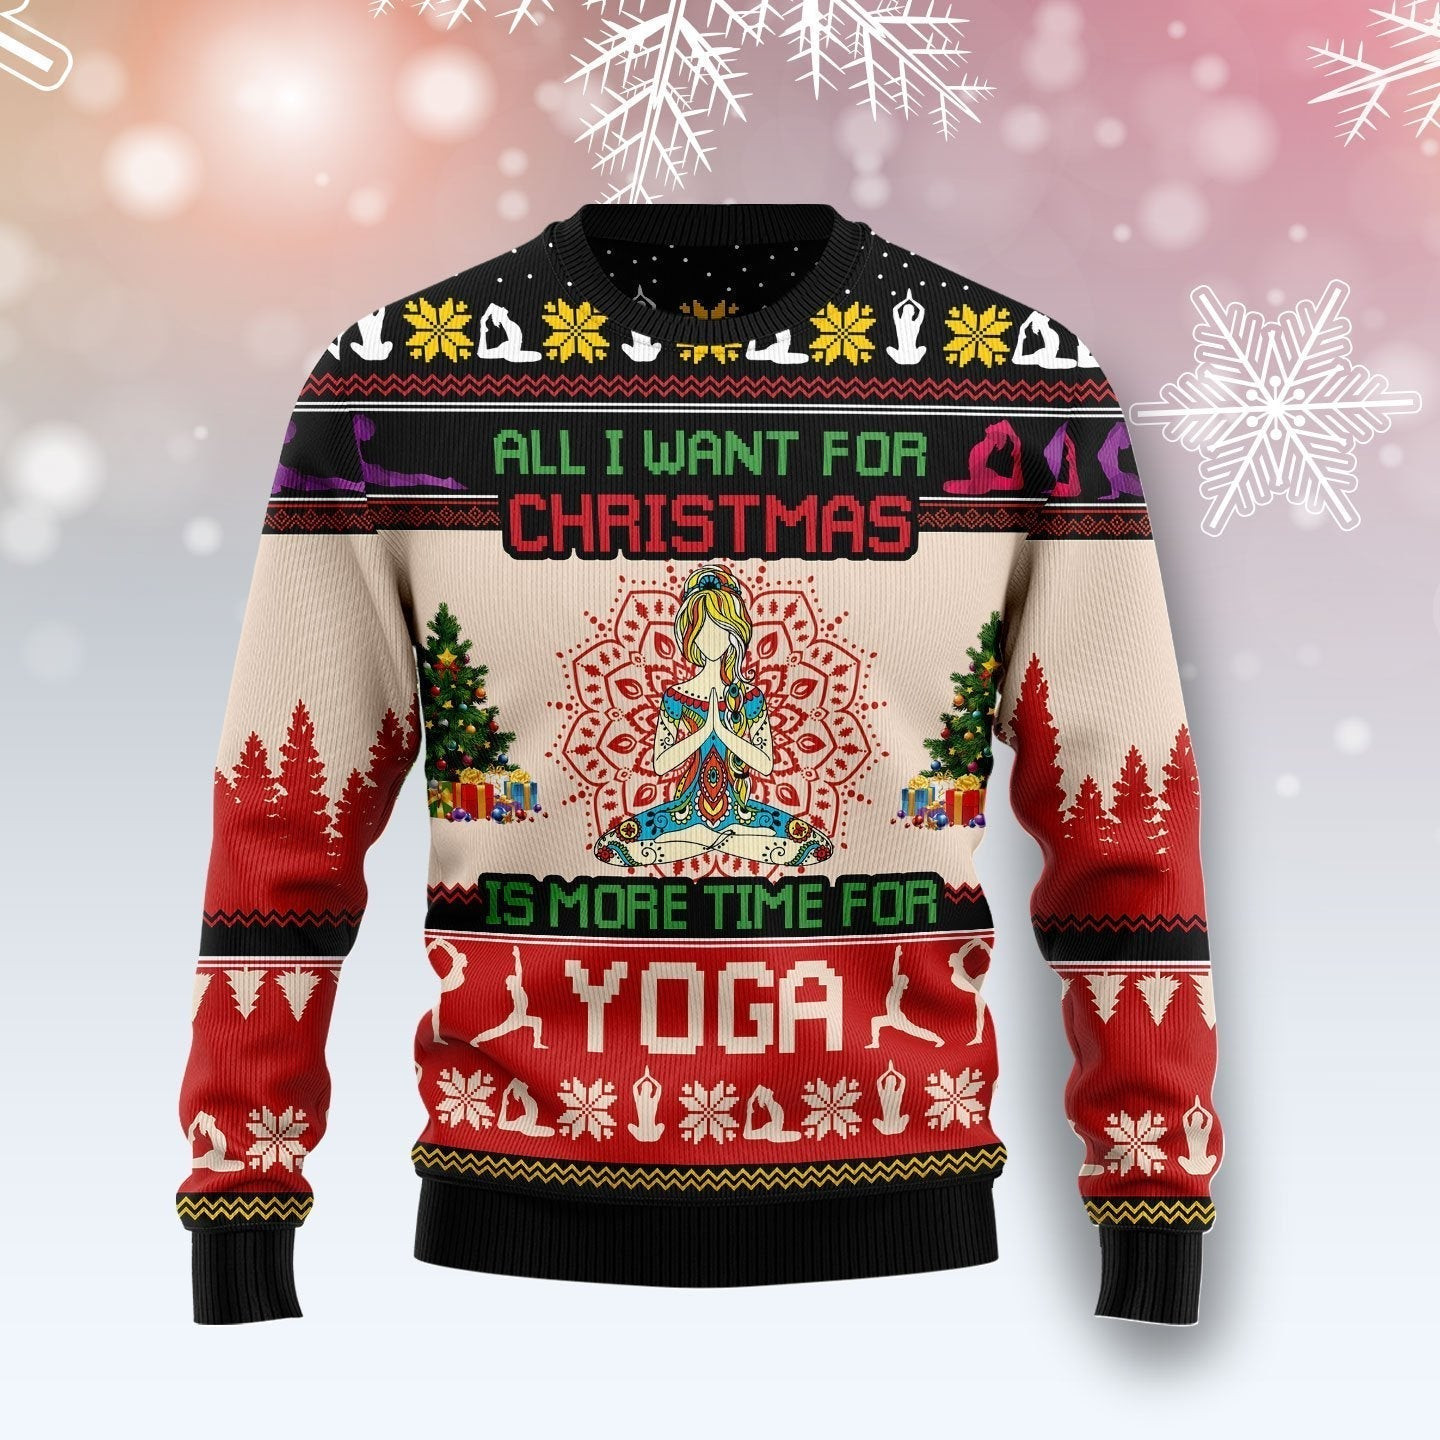 All I Want For Christmas Is More Time For Yoga Ugly Christmas Sweater Ugly Sweater For Men Women, Holiday Sweater